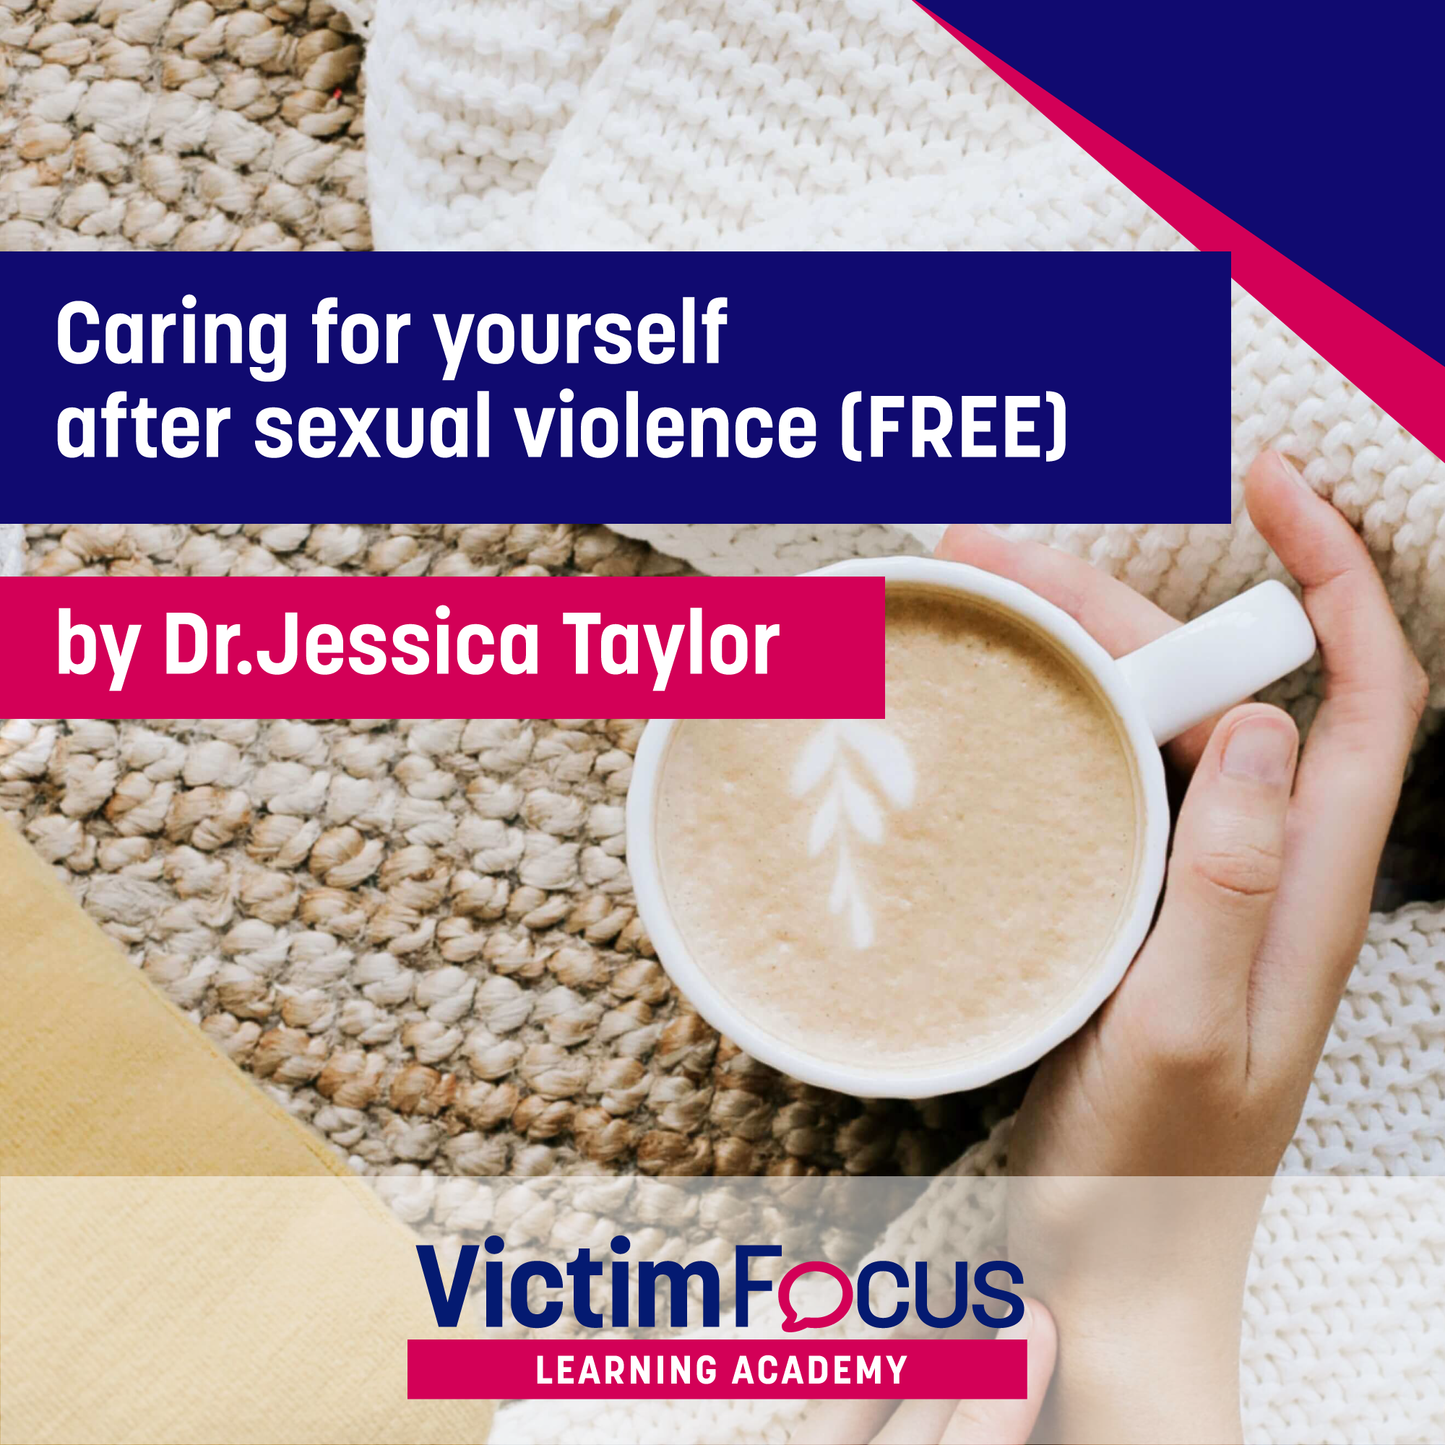 FREE COURSE - Caring for yourself after sexual violence